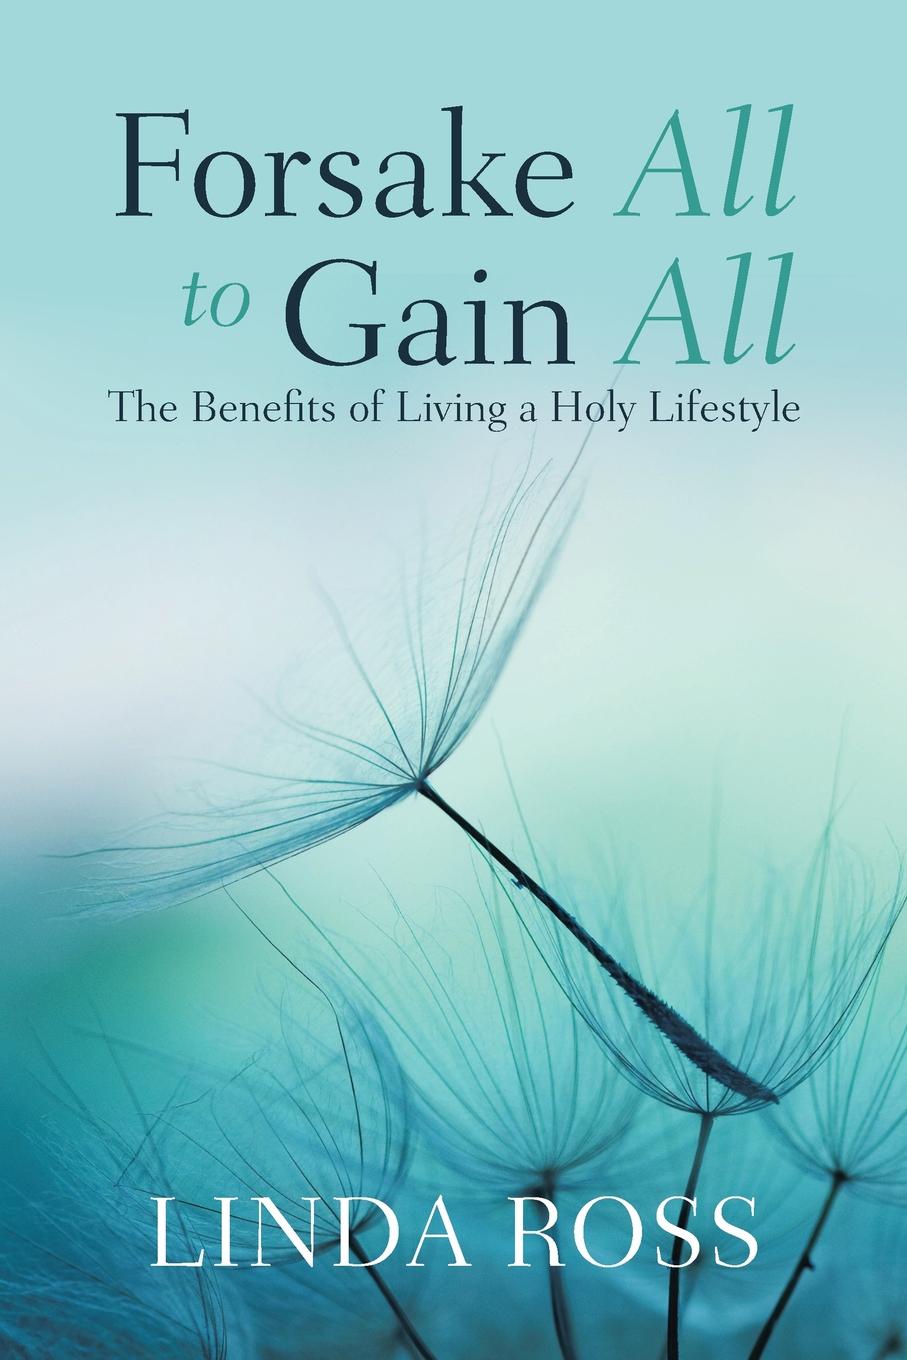 Forsake All to Gain All. The Benefits of Living a Holy Lifestyle